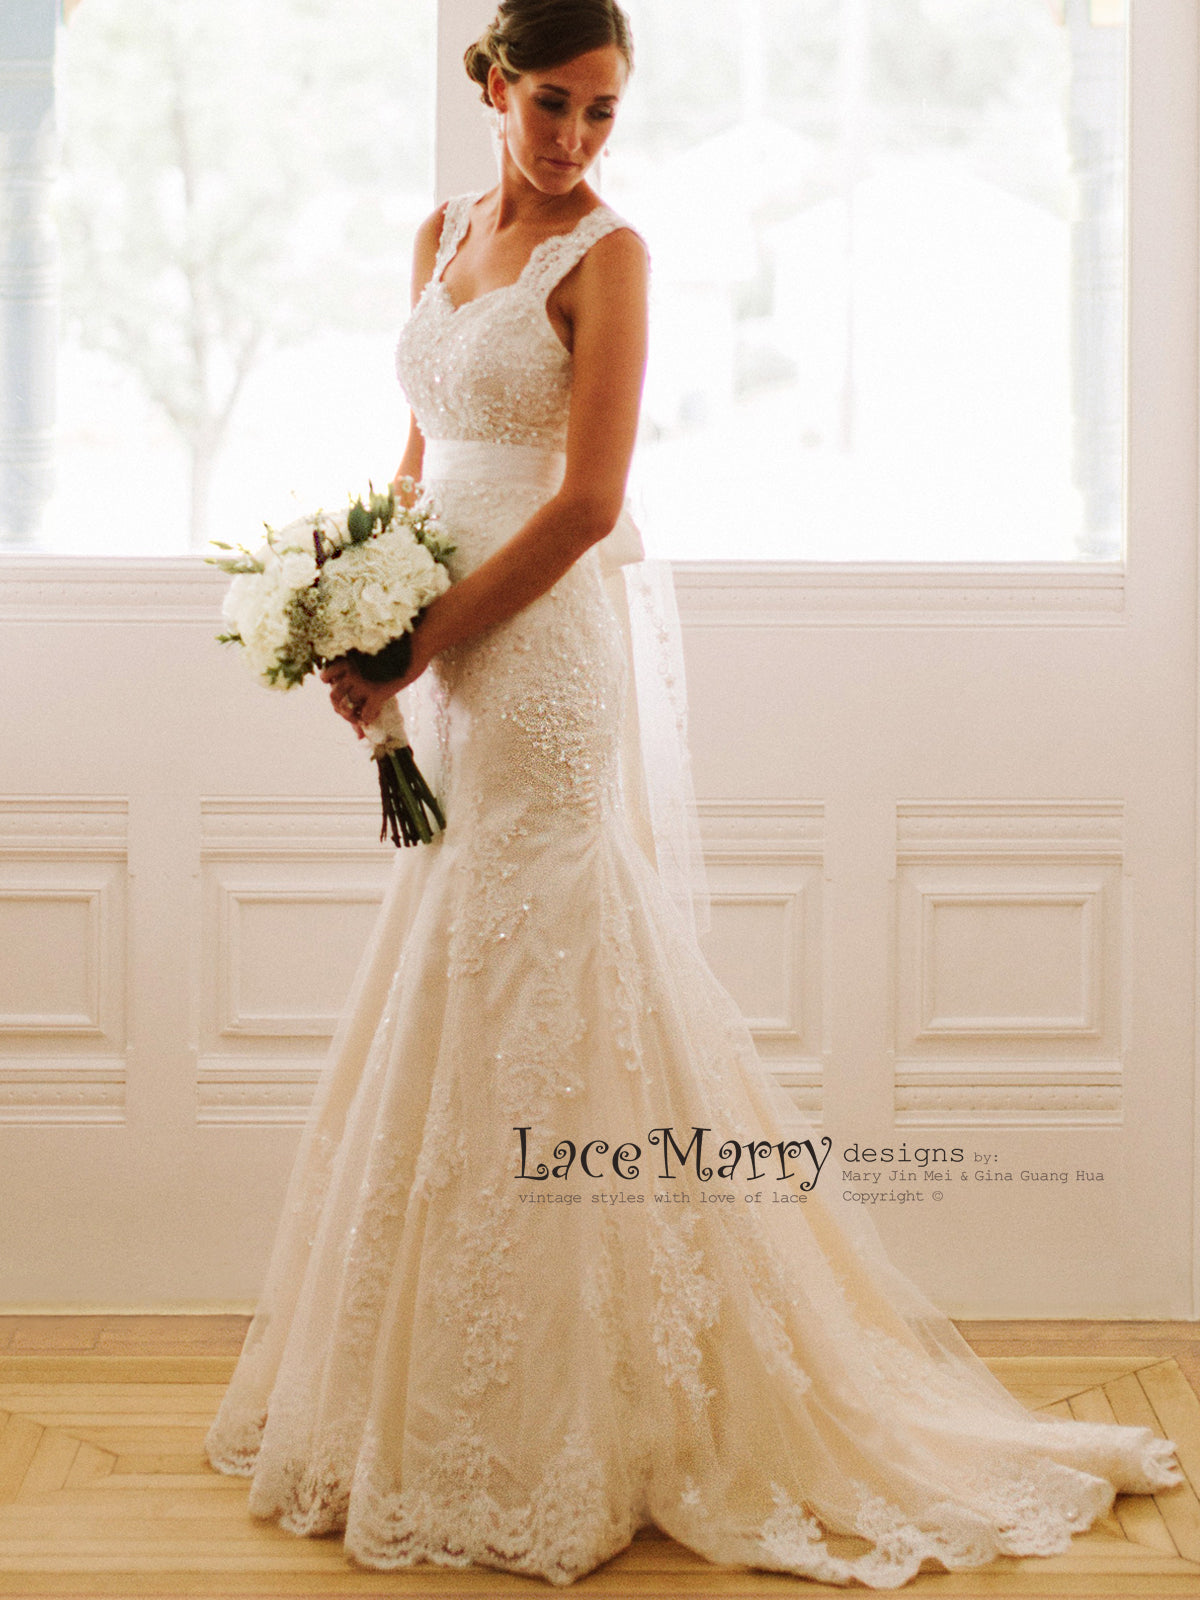 Custom Short Wedding Dress With Sweetheart Illusion Lace Bodice - LaceMarry